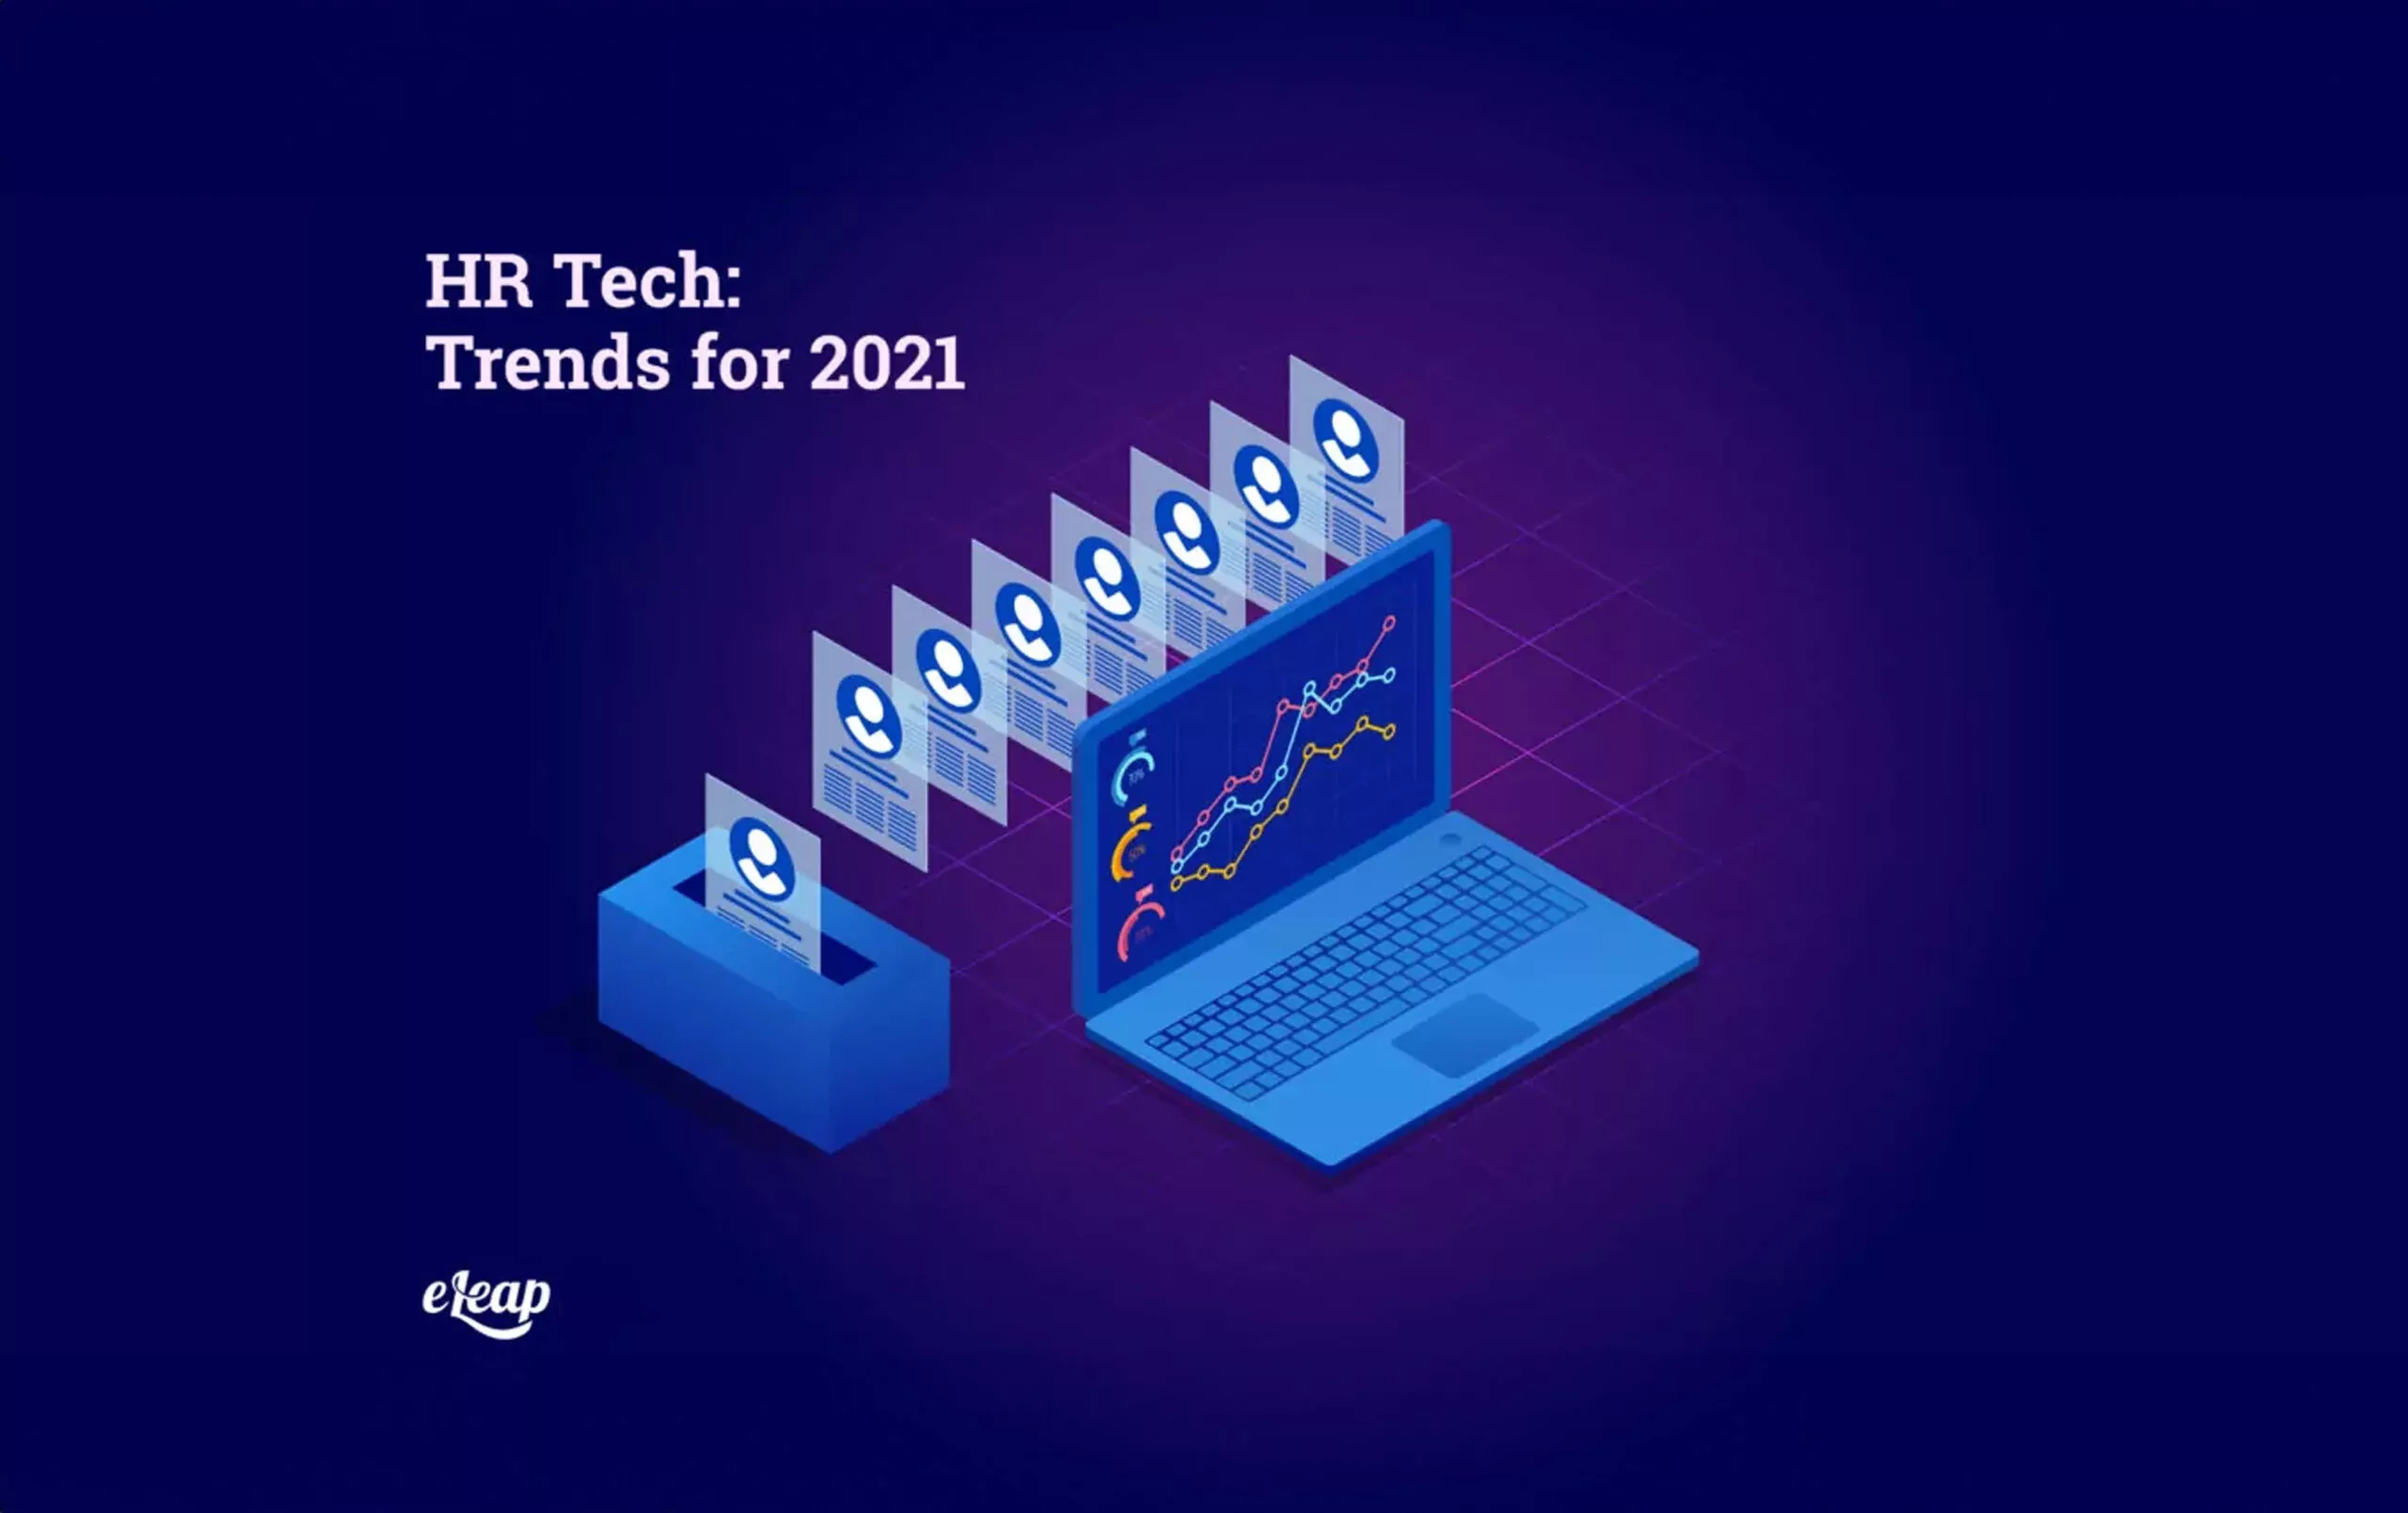 HR Tech: Trends for 2021